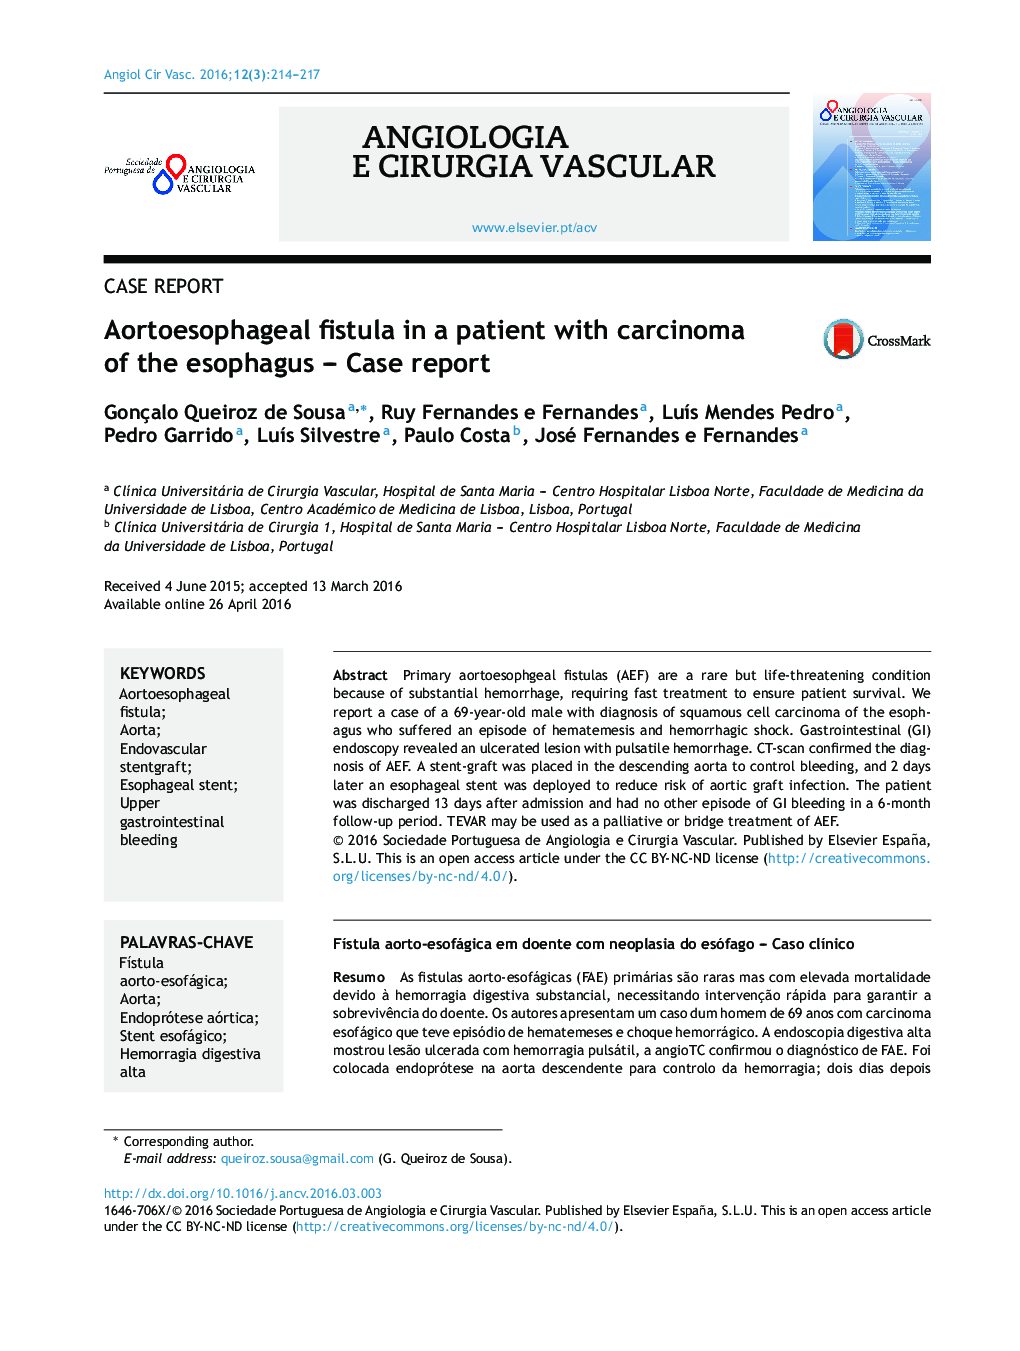 Aortoesophageal fistula in a patient with carcinoma of the esophagus - Case report